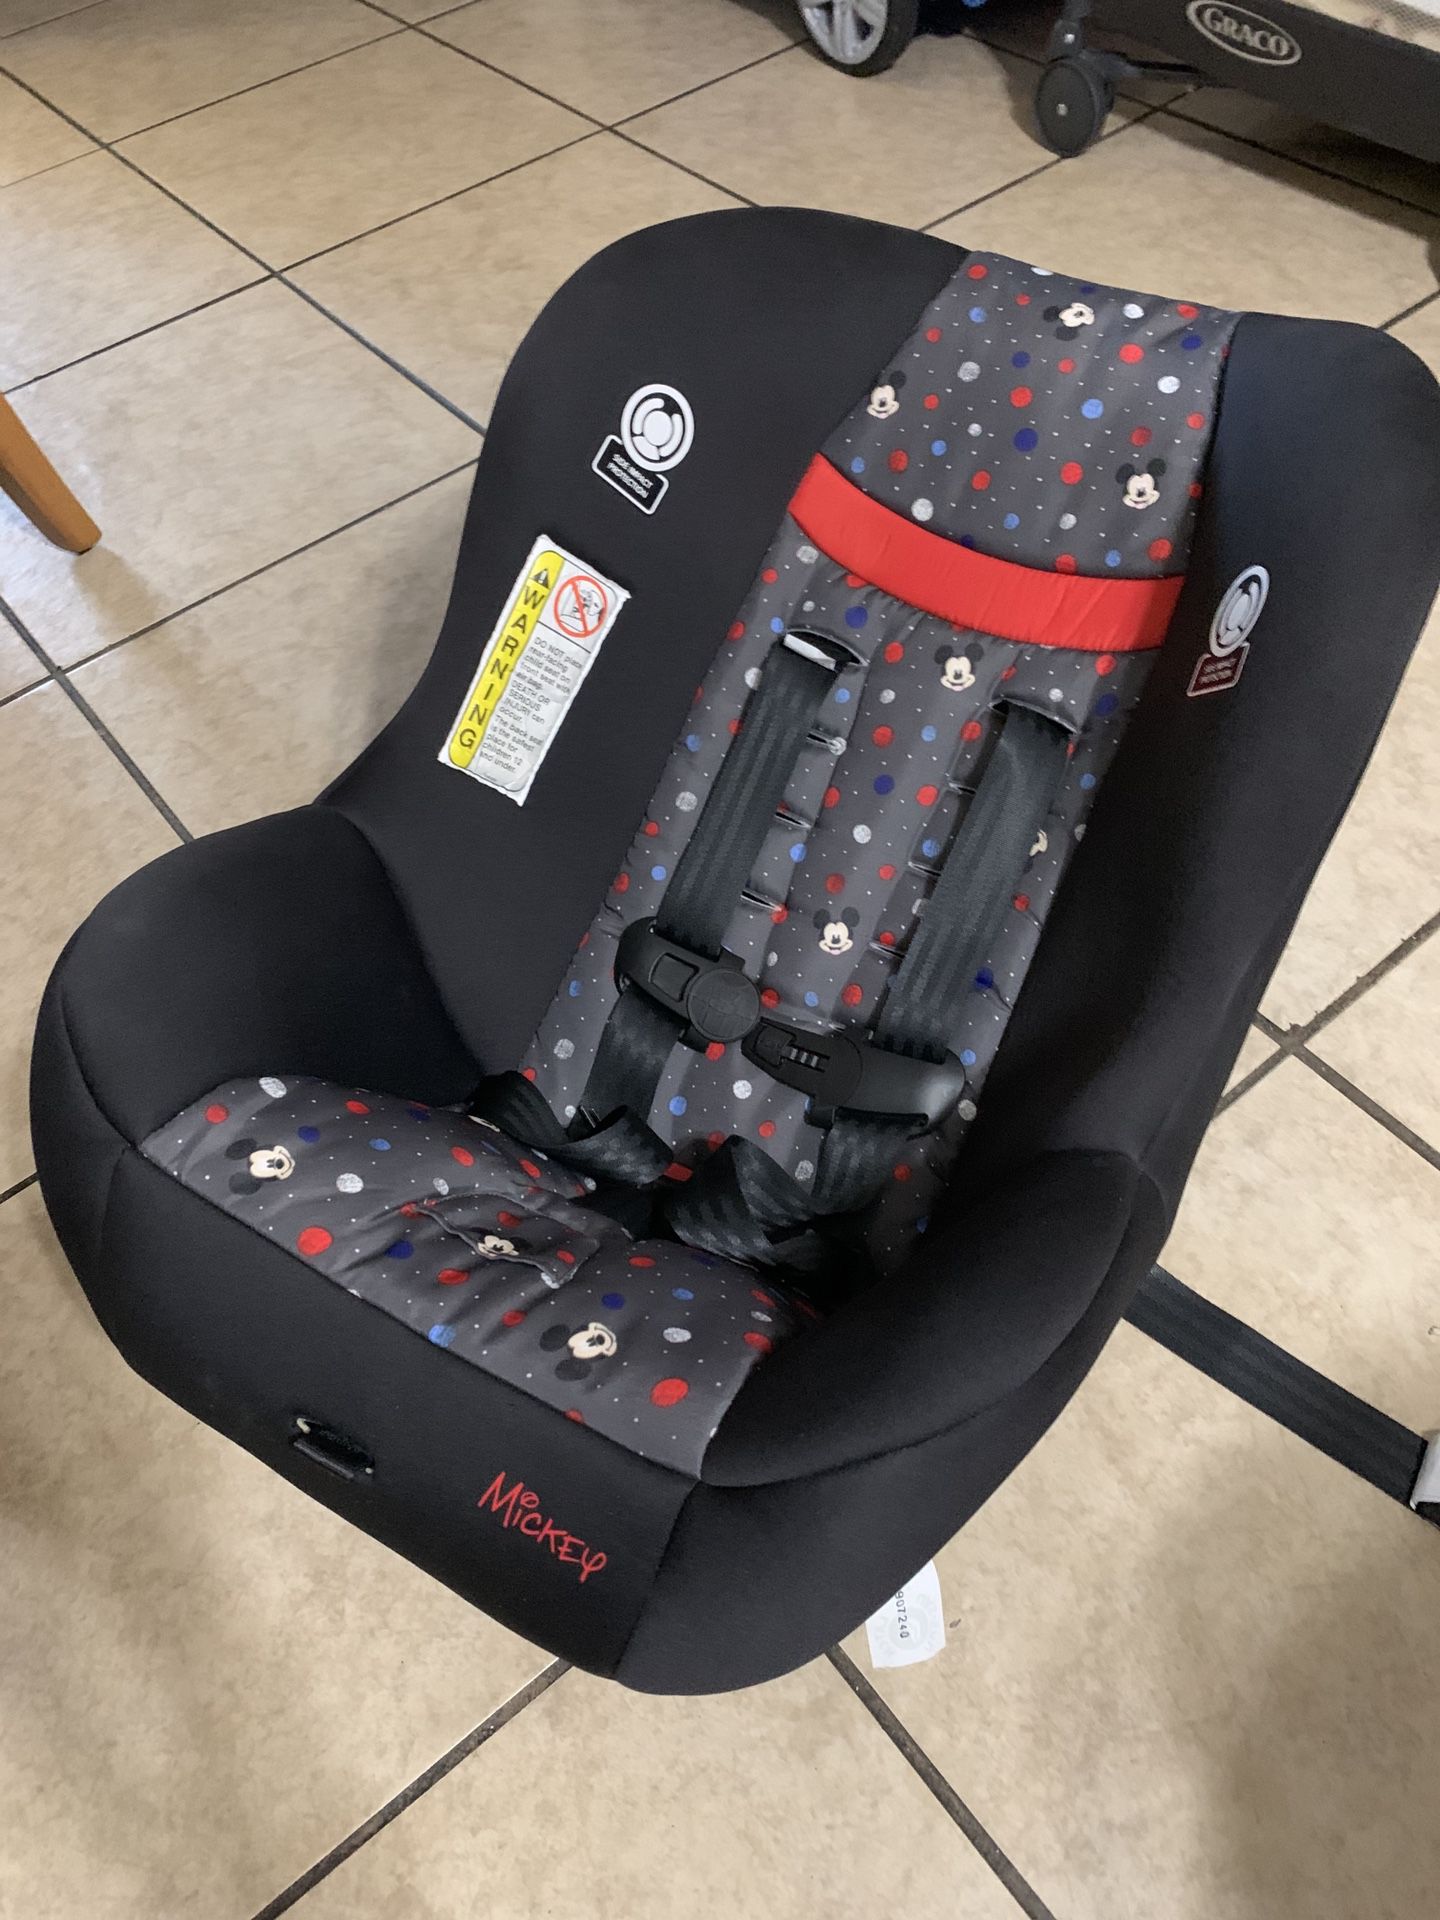 Mickey Mouse Car Seat